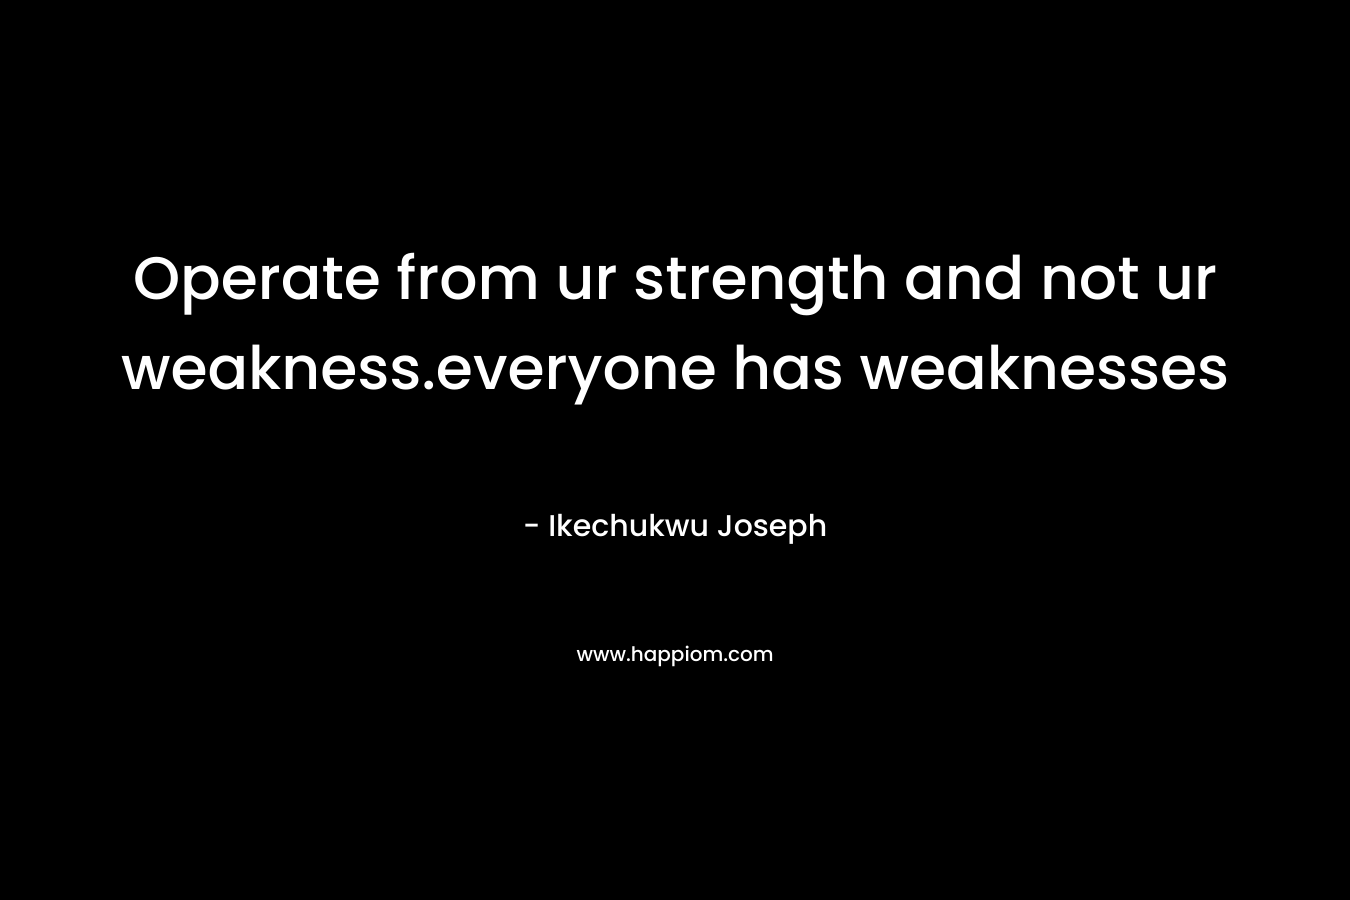 Operate from ur strength and not ur weakness.everyone has weaknesses